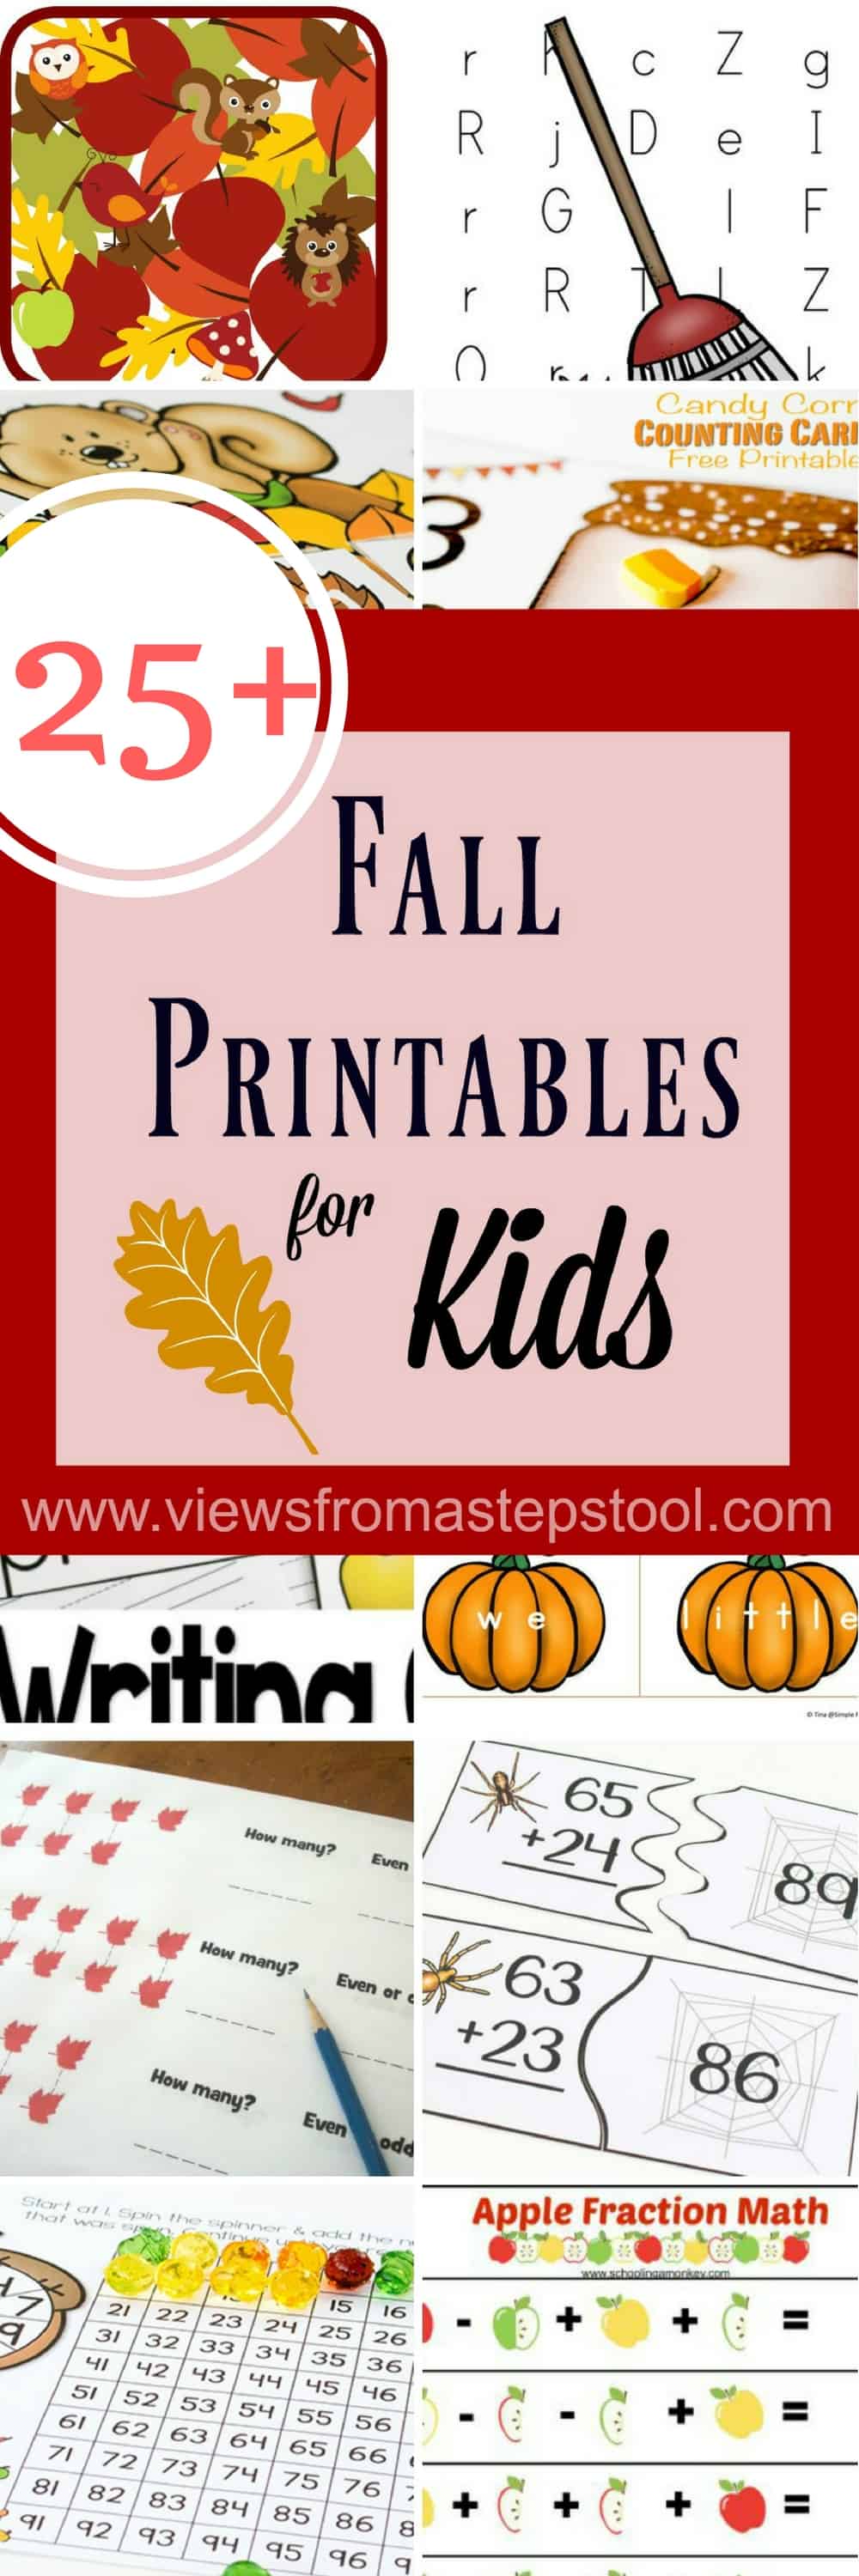 Ultimate List of Fall Printables for Kids